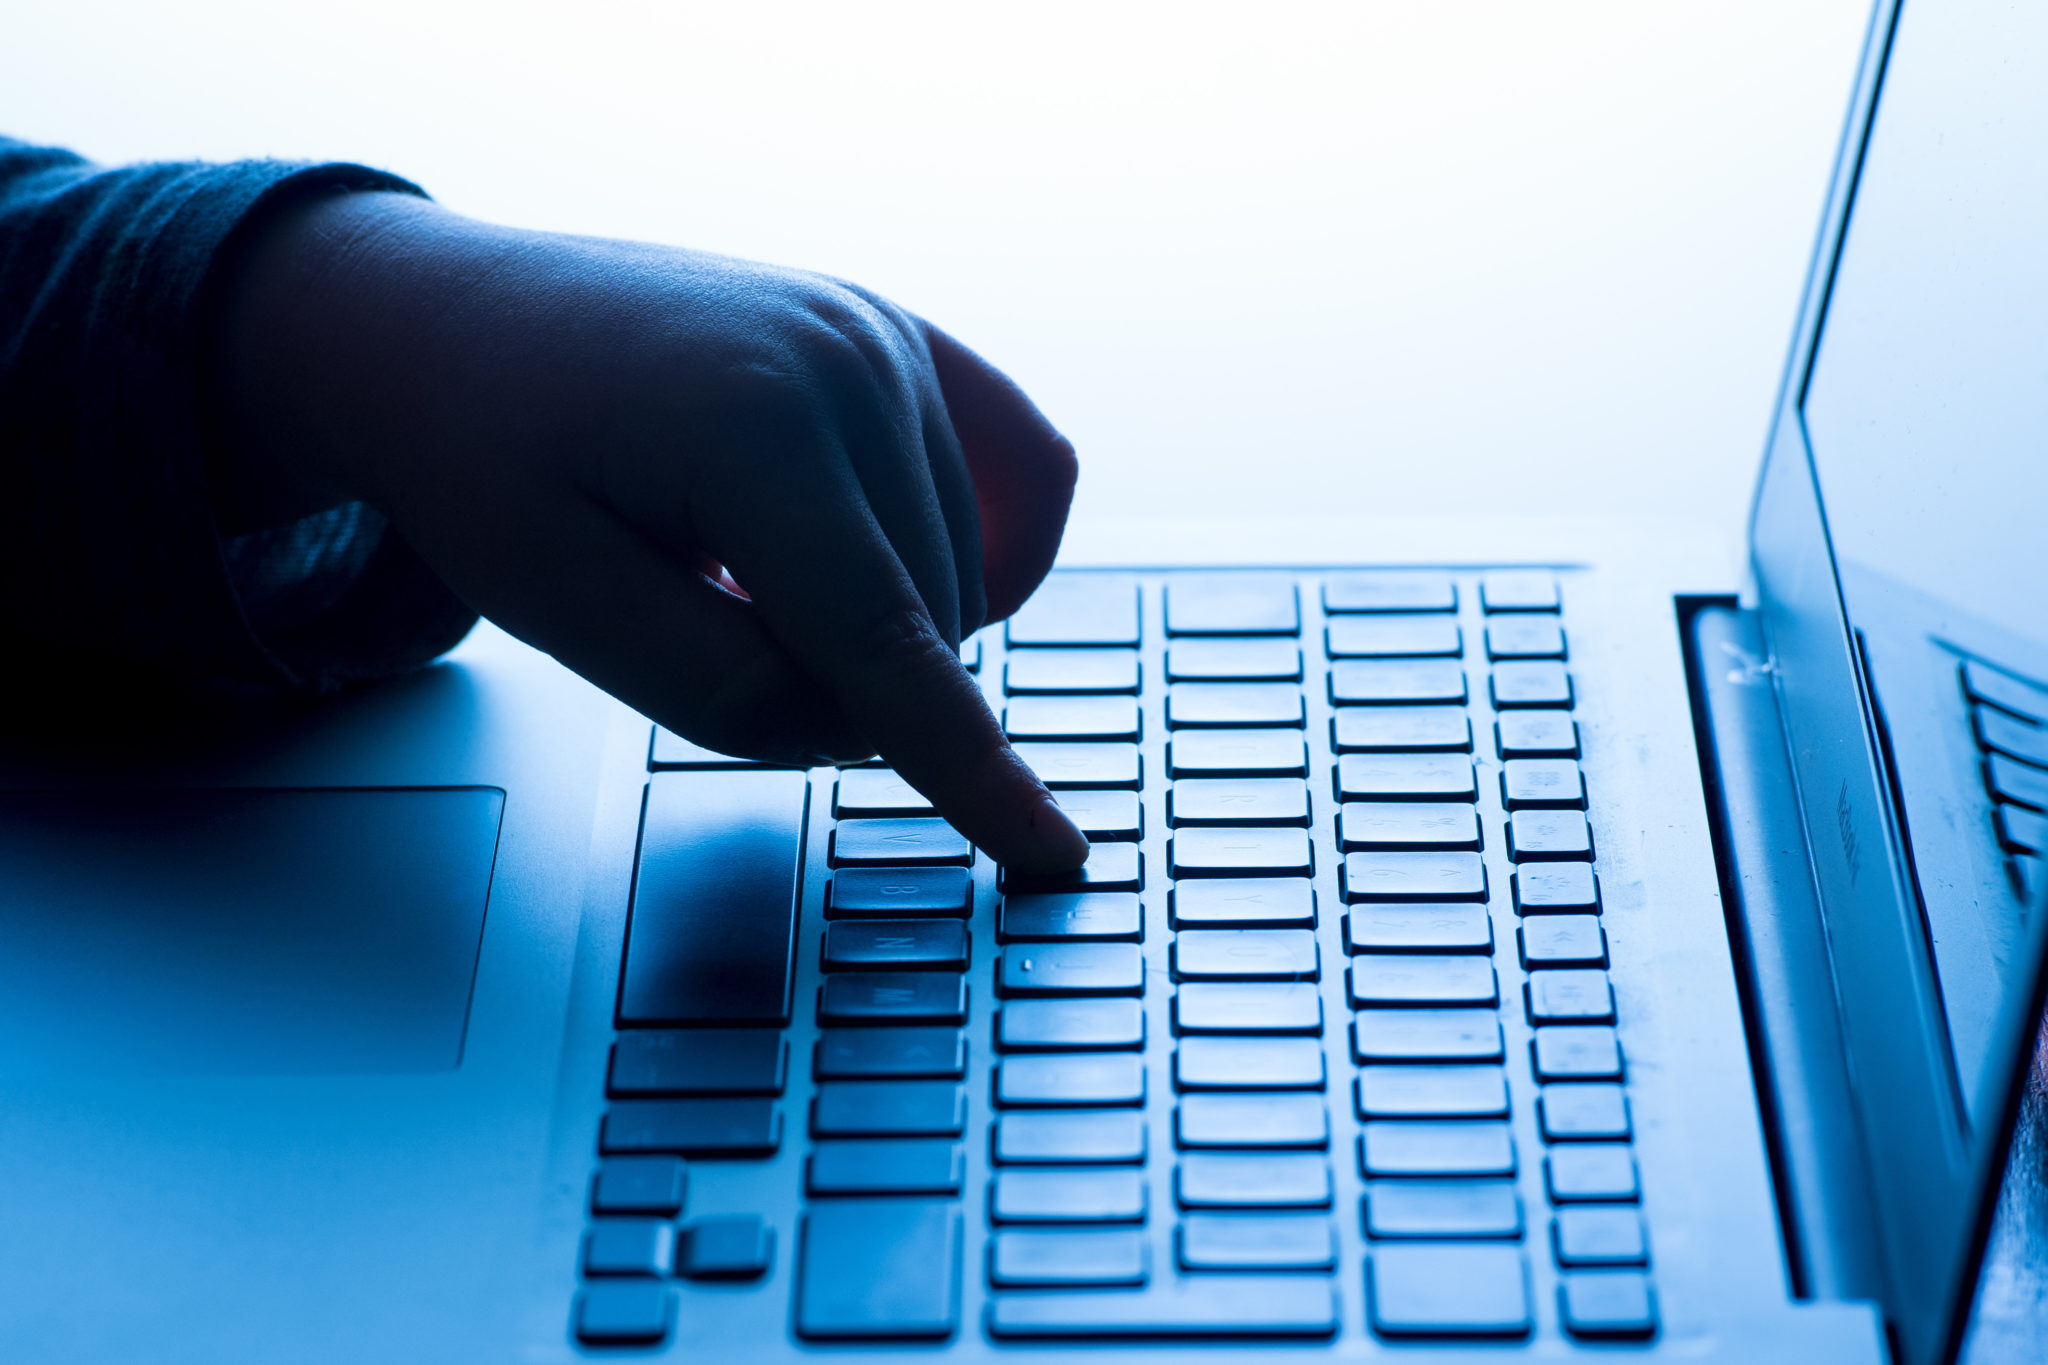 Person with fingers on keyboard of laptop in dark lighting